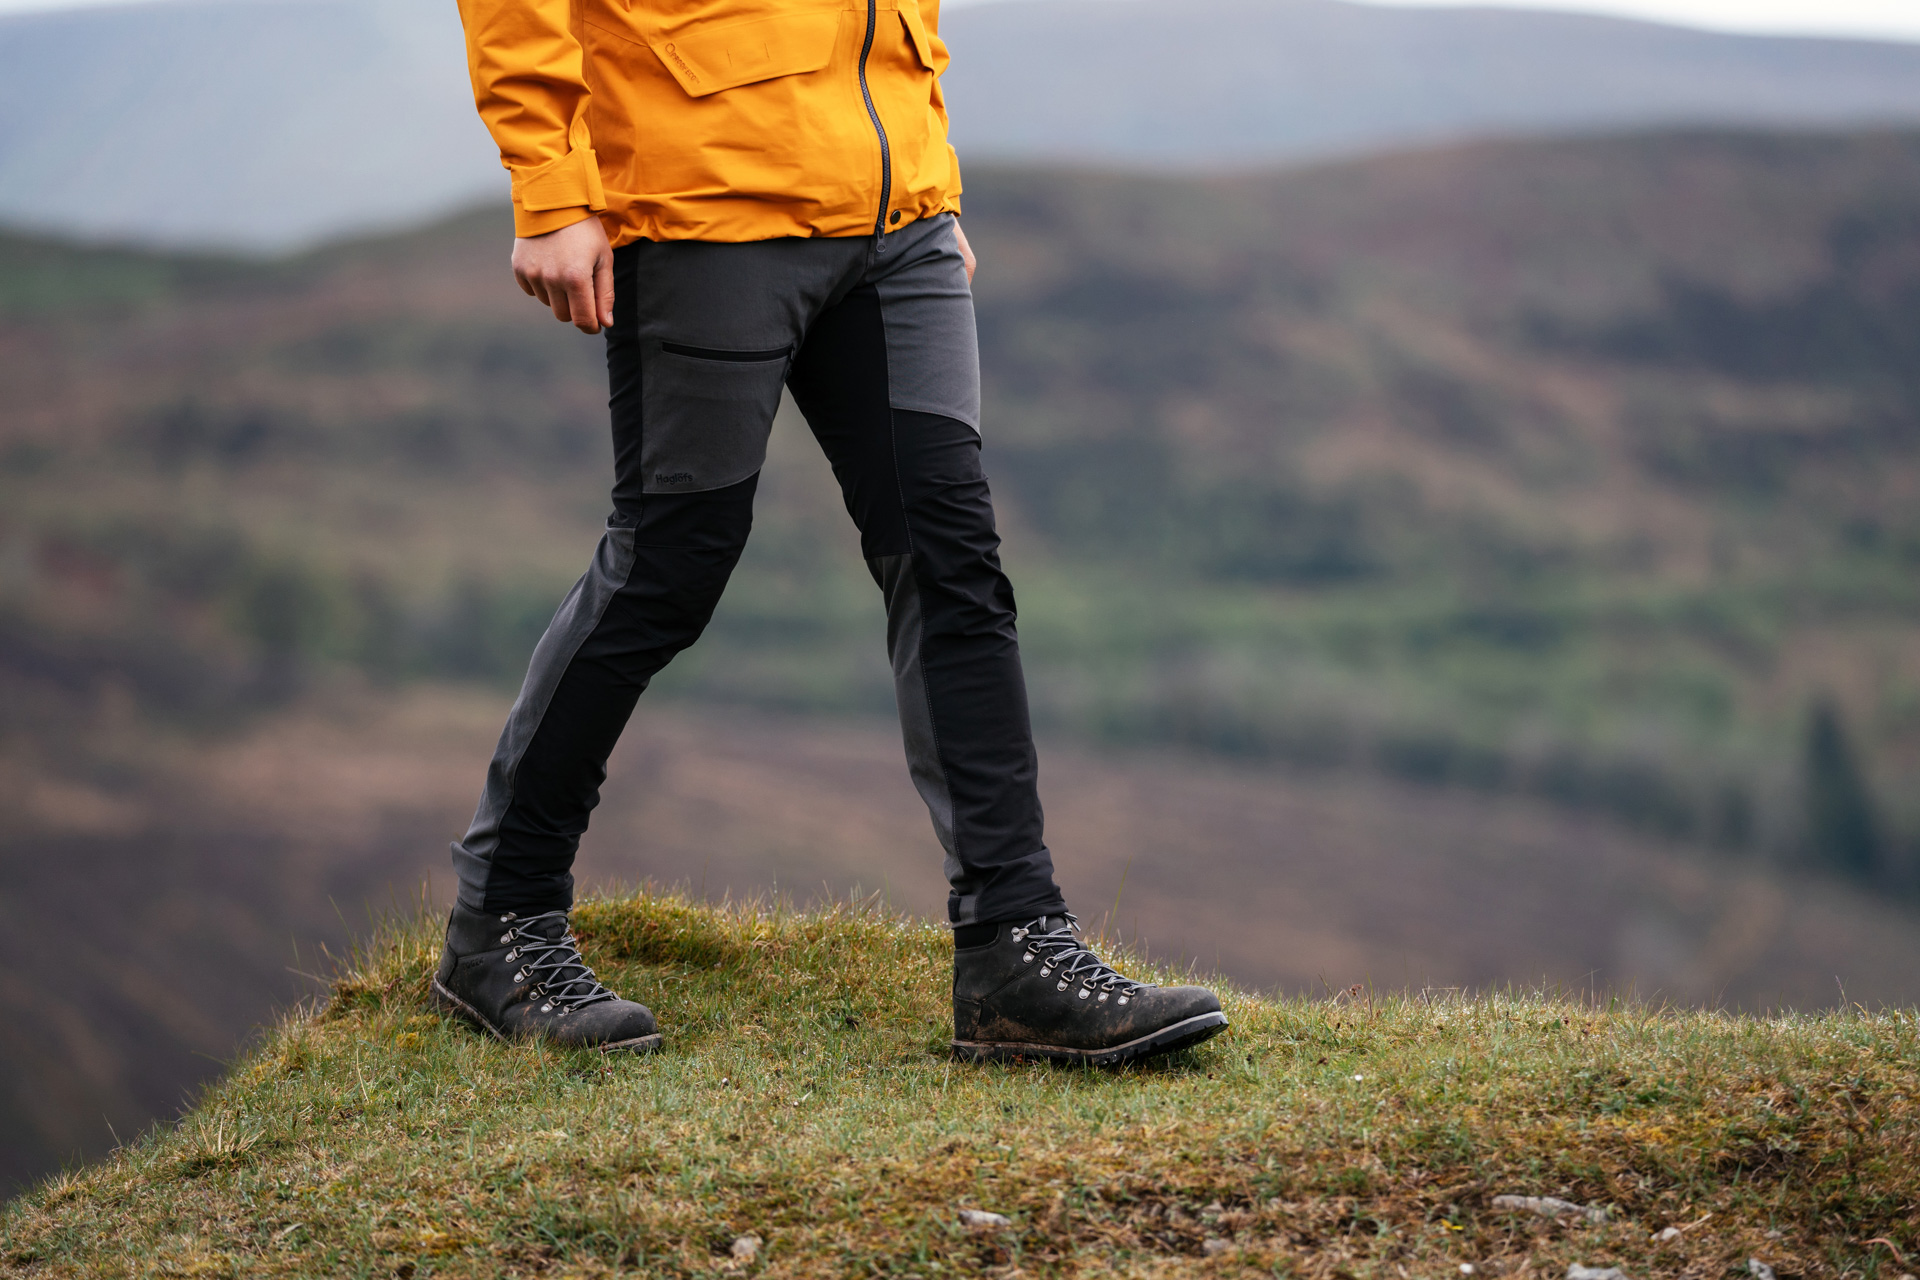 A two-day trekking with the Haglöfs Rugged Mountain Pants